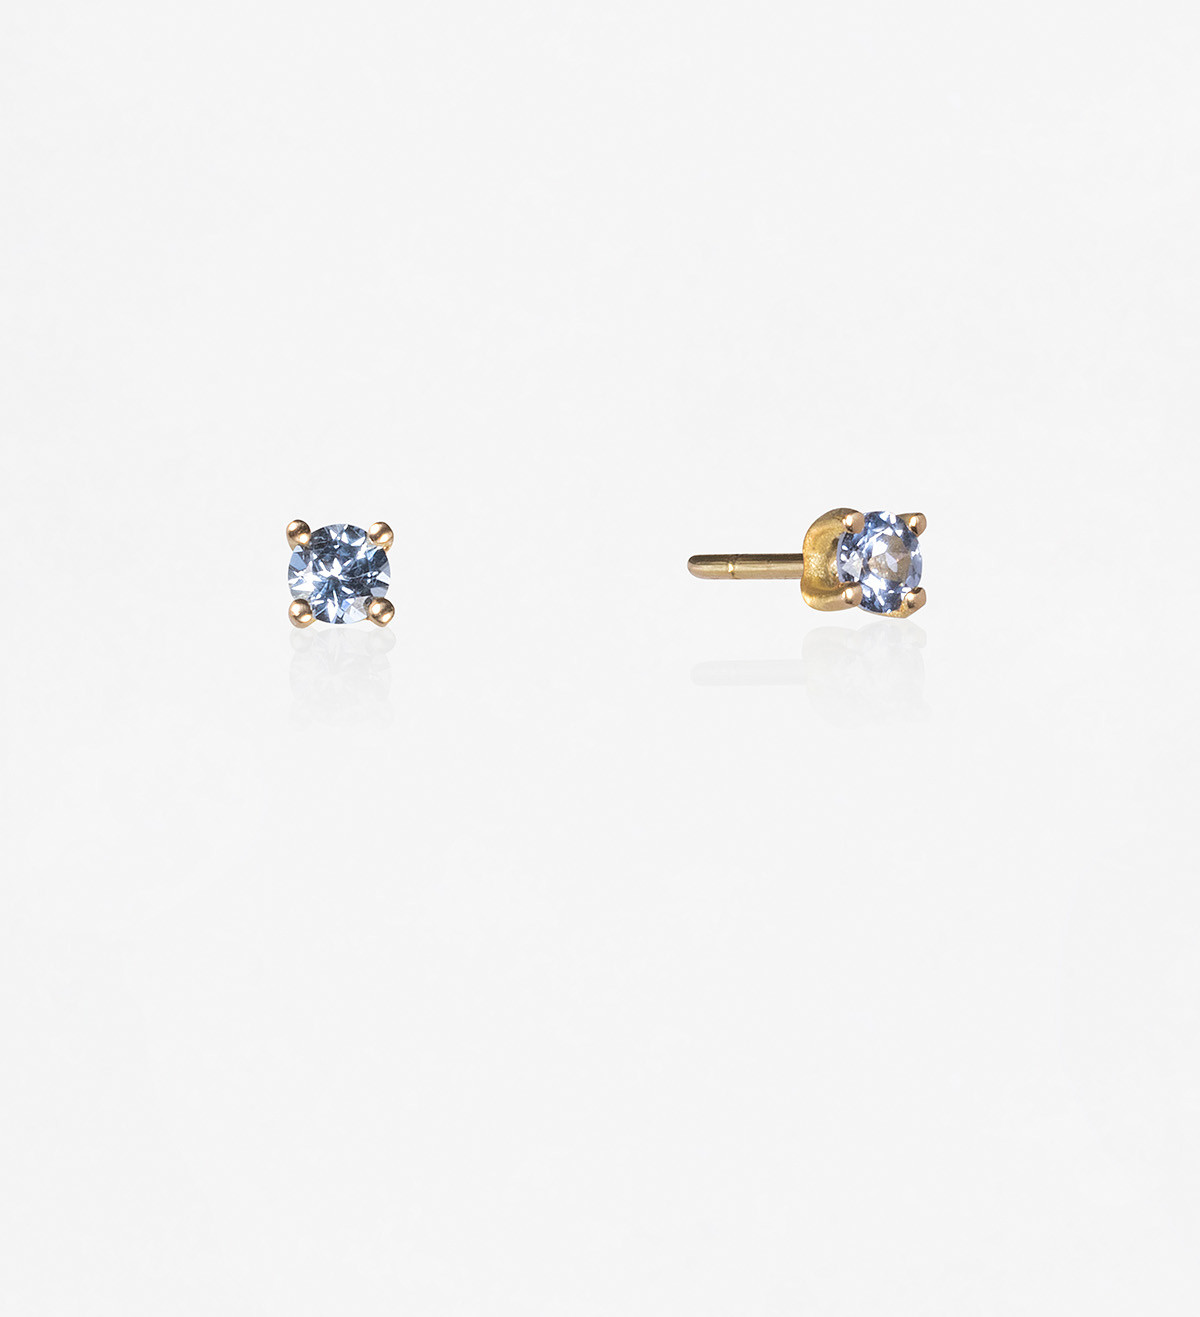 18k gold earrings with Wennick-Lefèvre blue sapphires 0,42ct